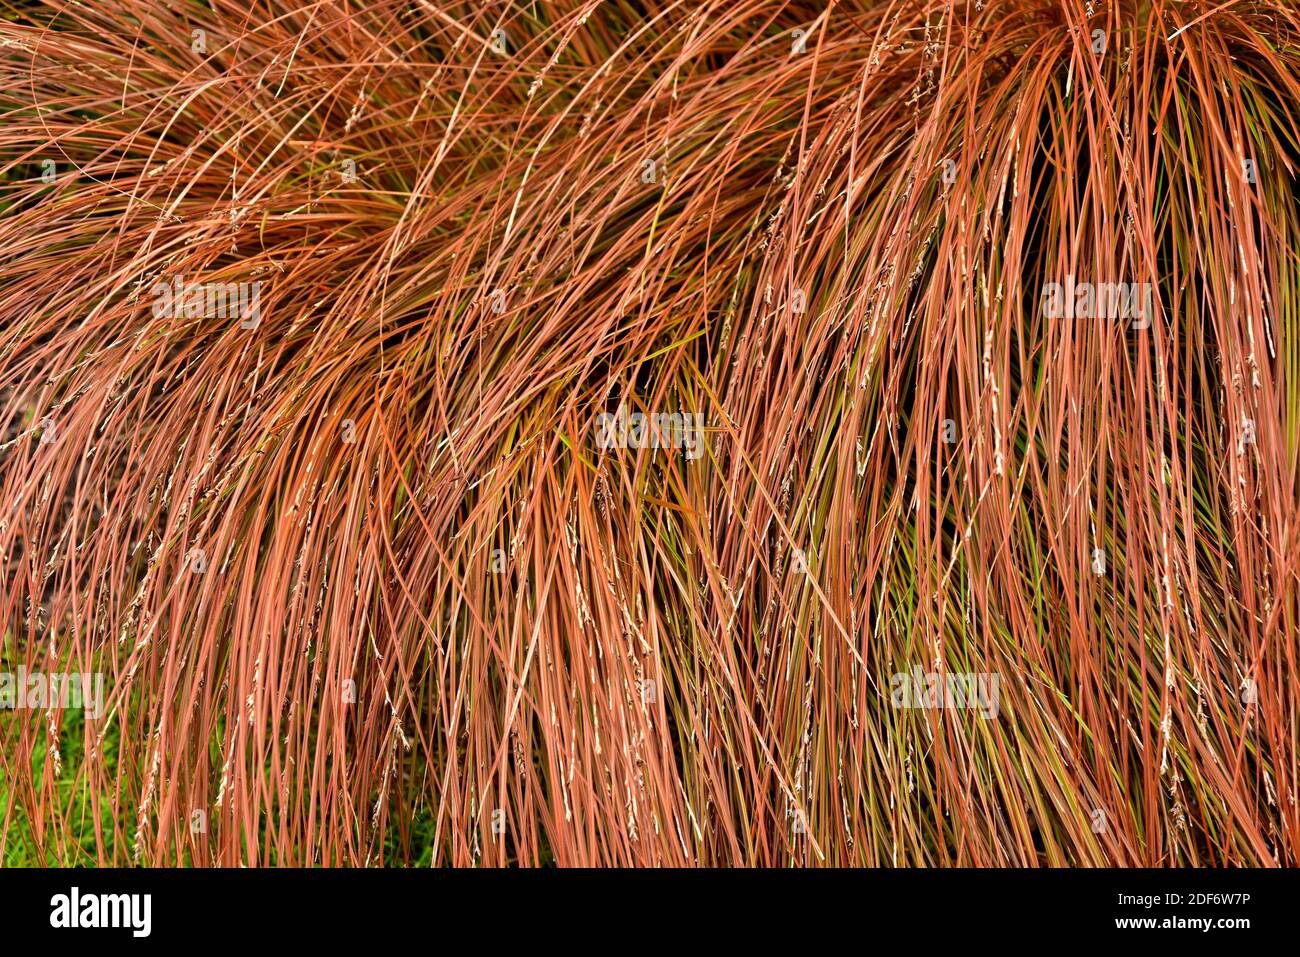 Weeping brown sedge (Carex flagellifera) is a perennial ornamental herb native to New Zealand. Stock Photo